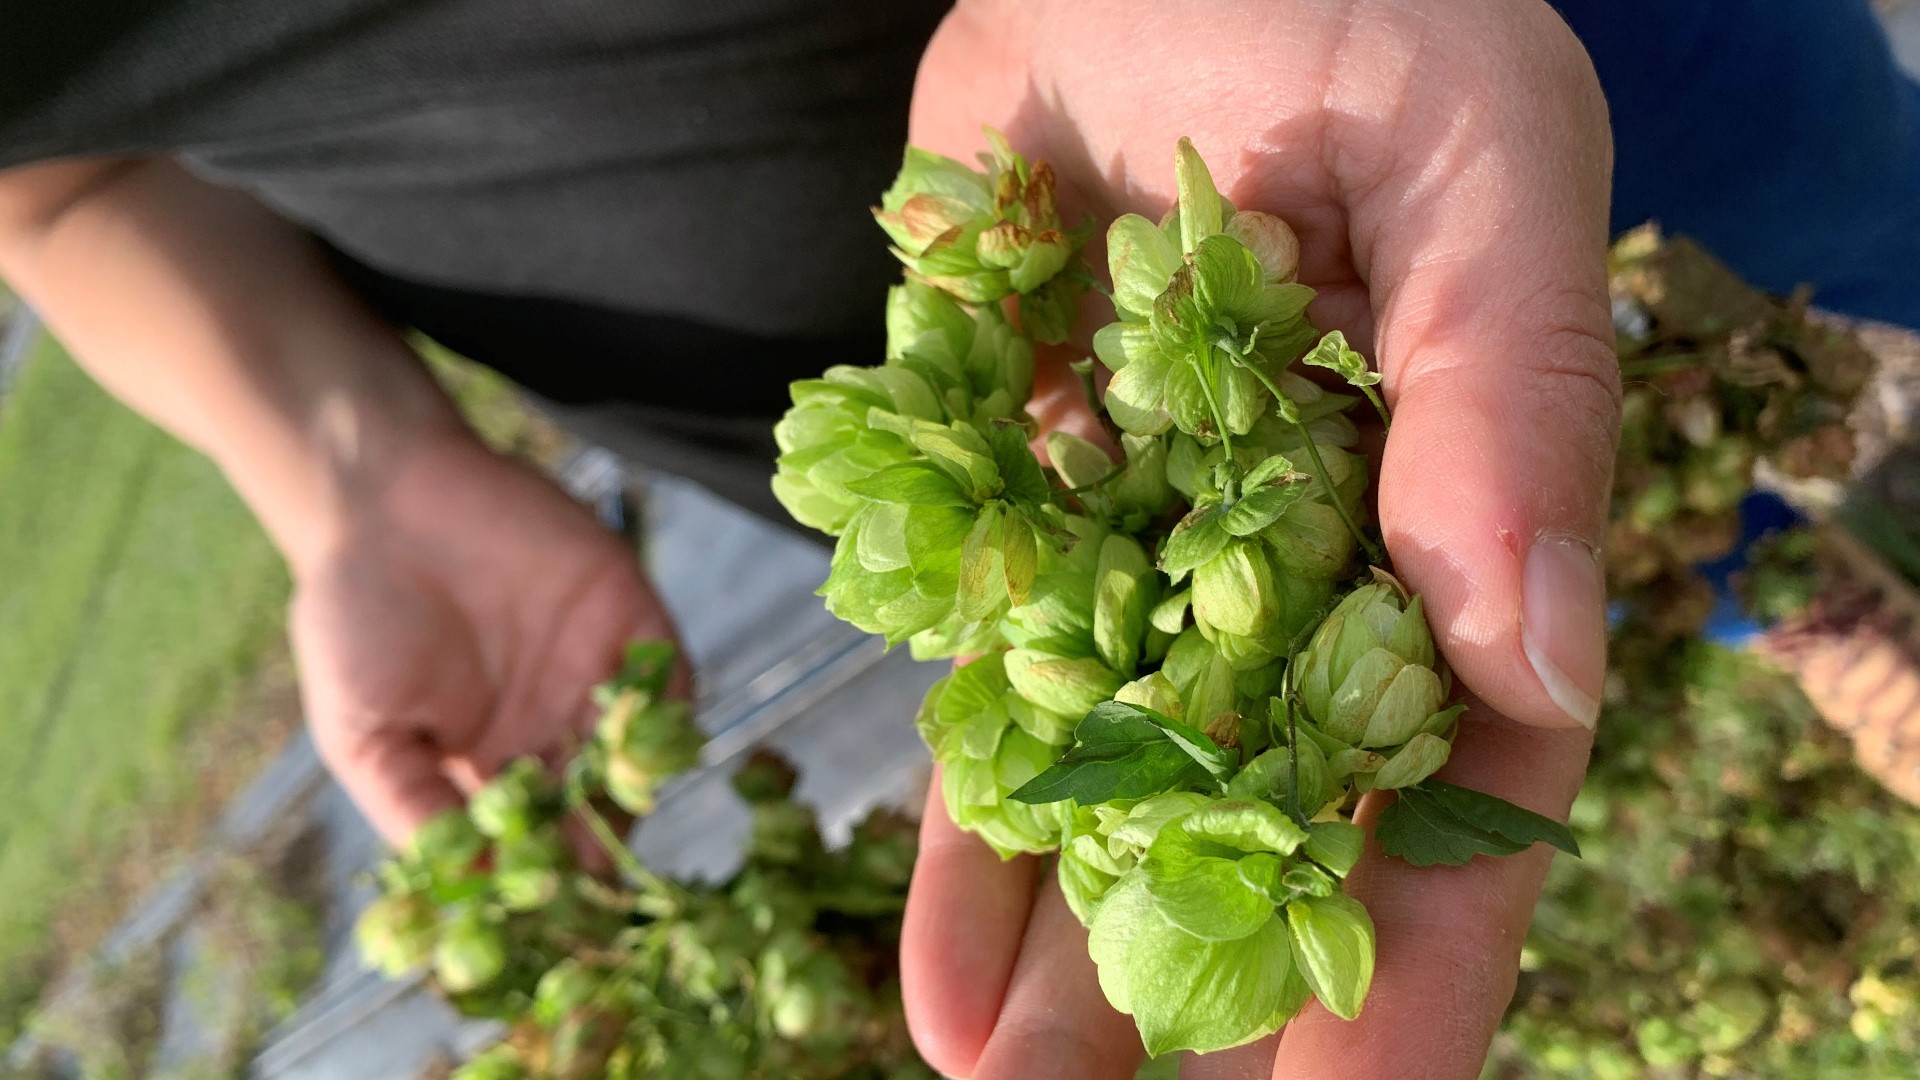 LED lighting is UF/IFAS' secret to producing hops twice a year.